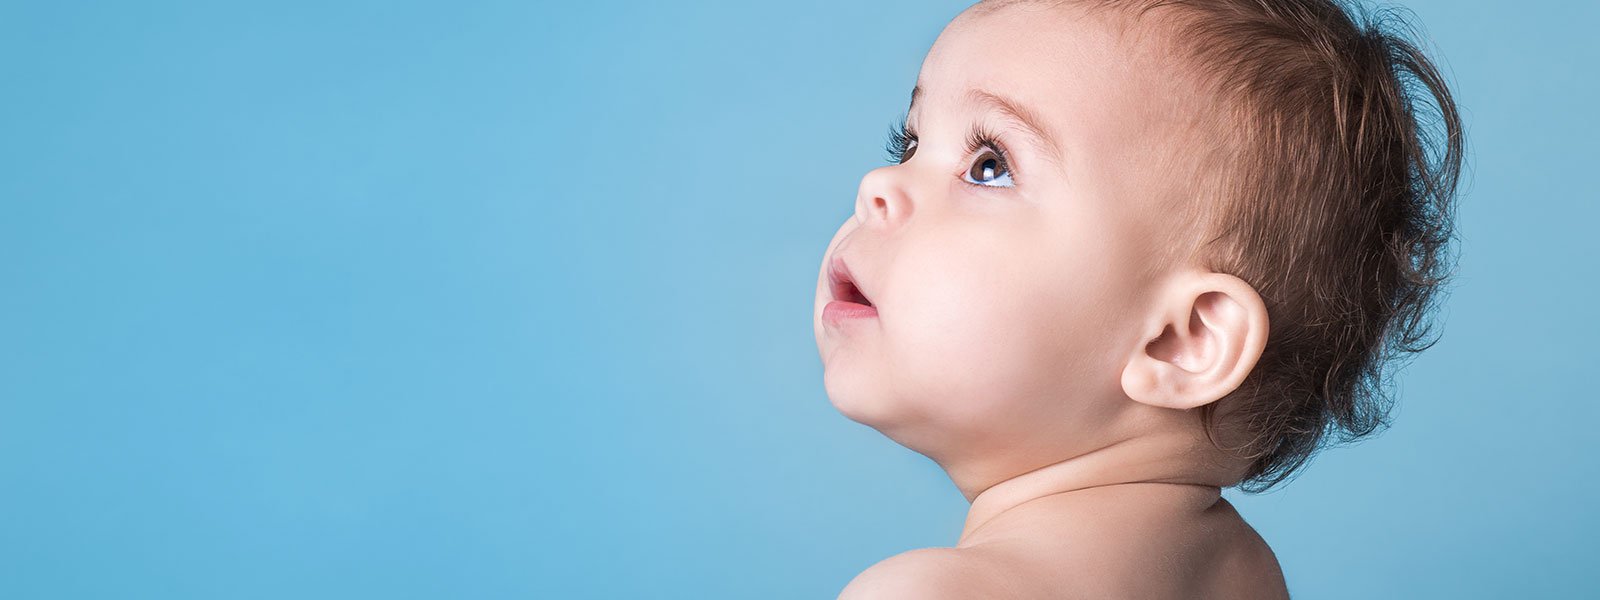 Image of baby looking up and to the left with a blue background